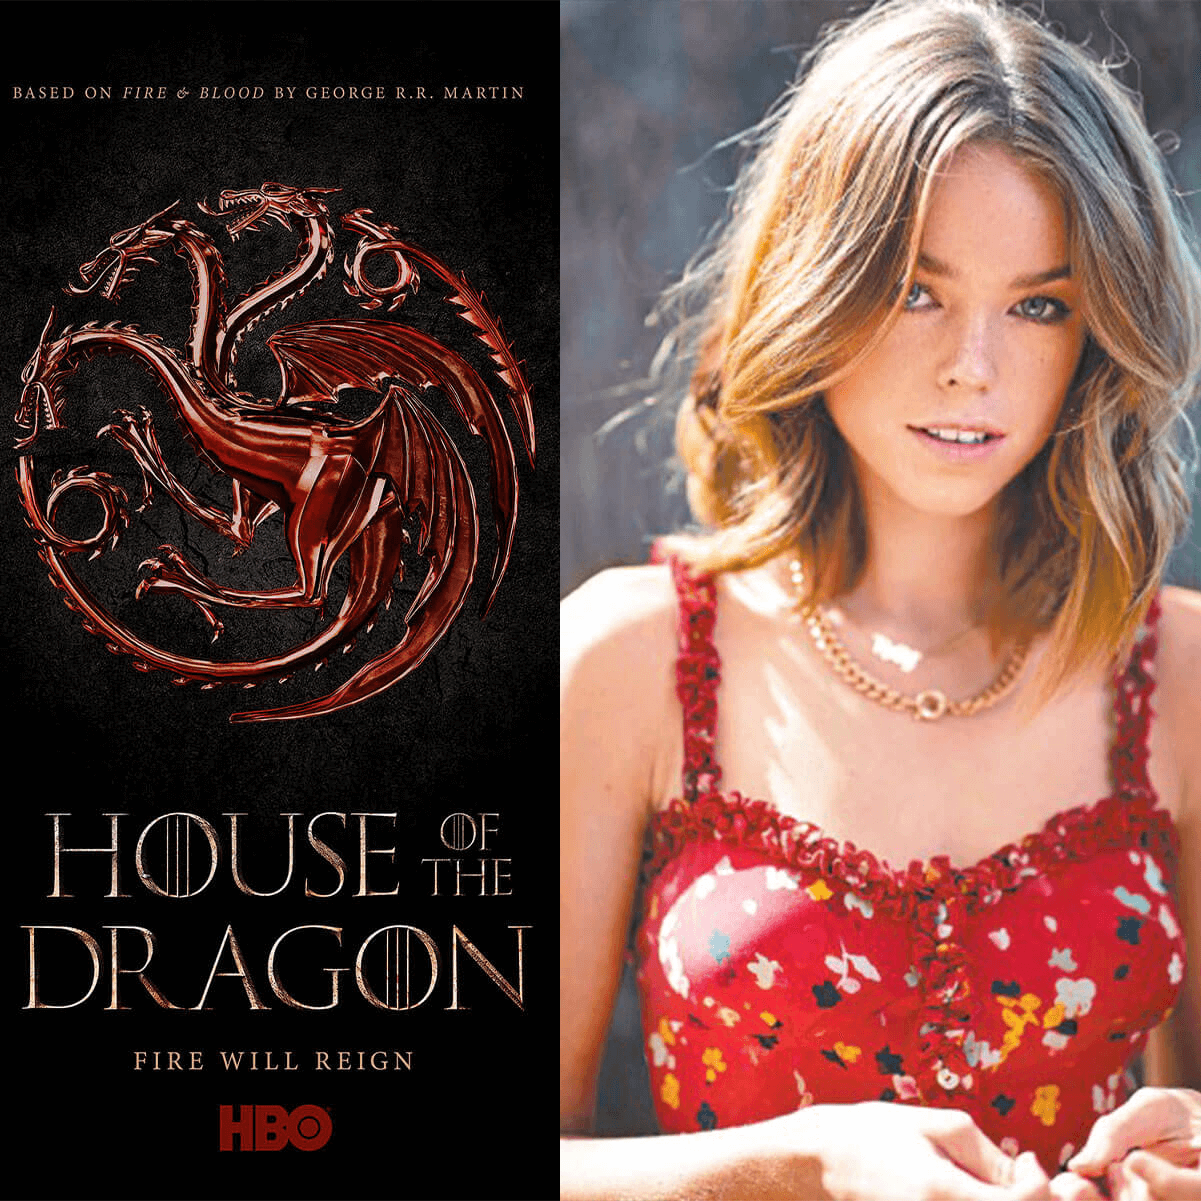 Milly Alcock has joined HBO’s Game of Thrones prequel series House of the Dragon